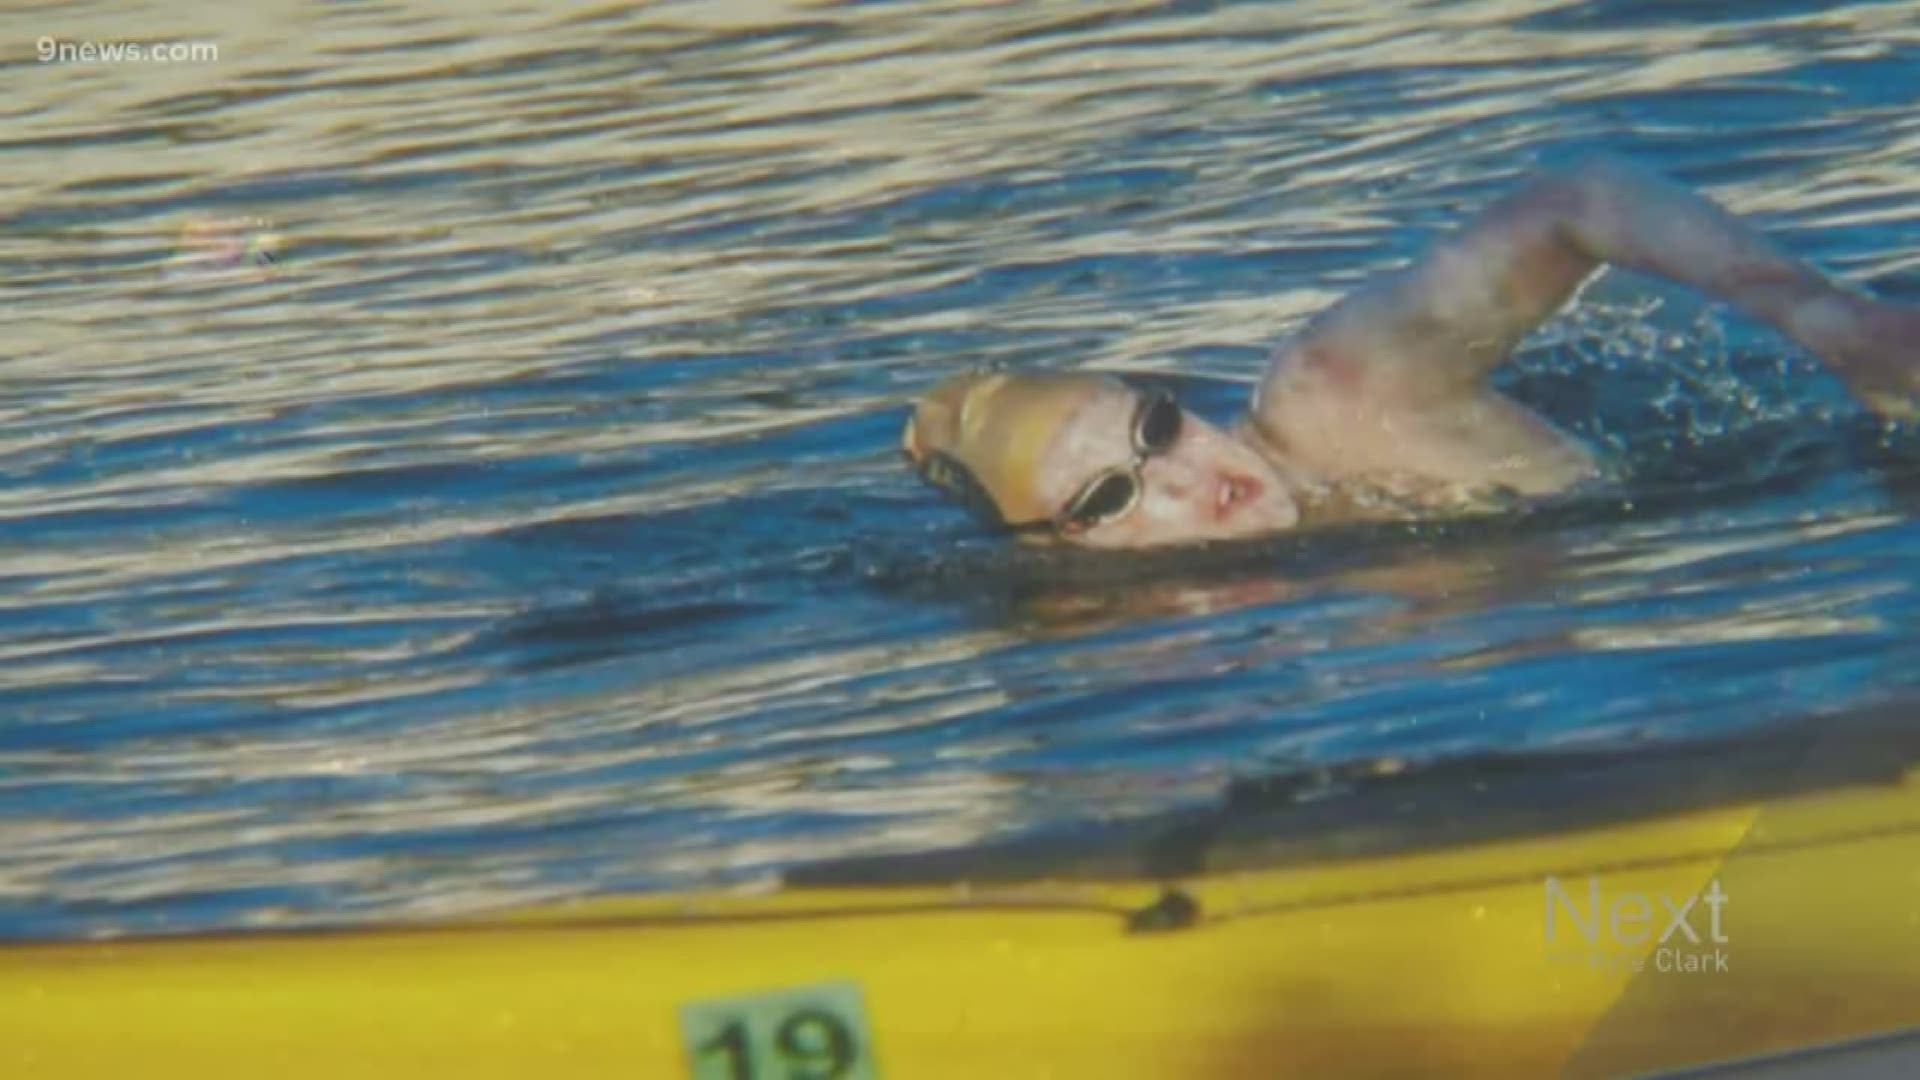 Sarah Thomas swam more than 80 miles and spent around 54 hours in the chilly water that is about 64 degrees.